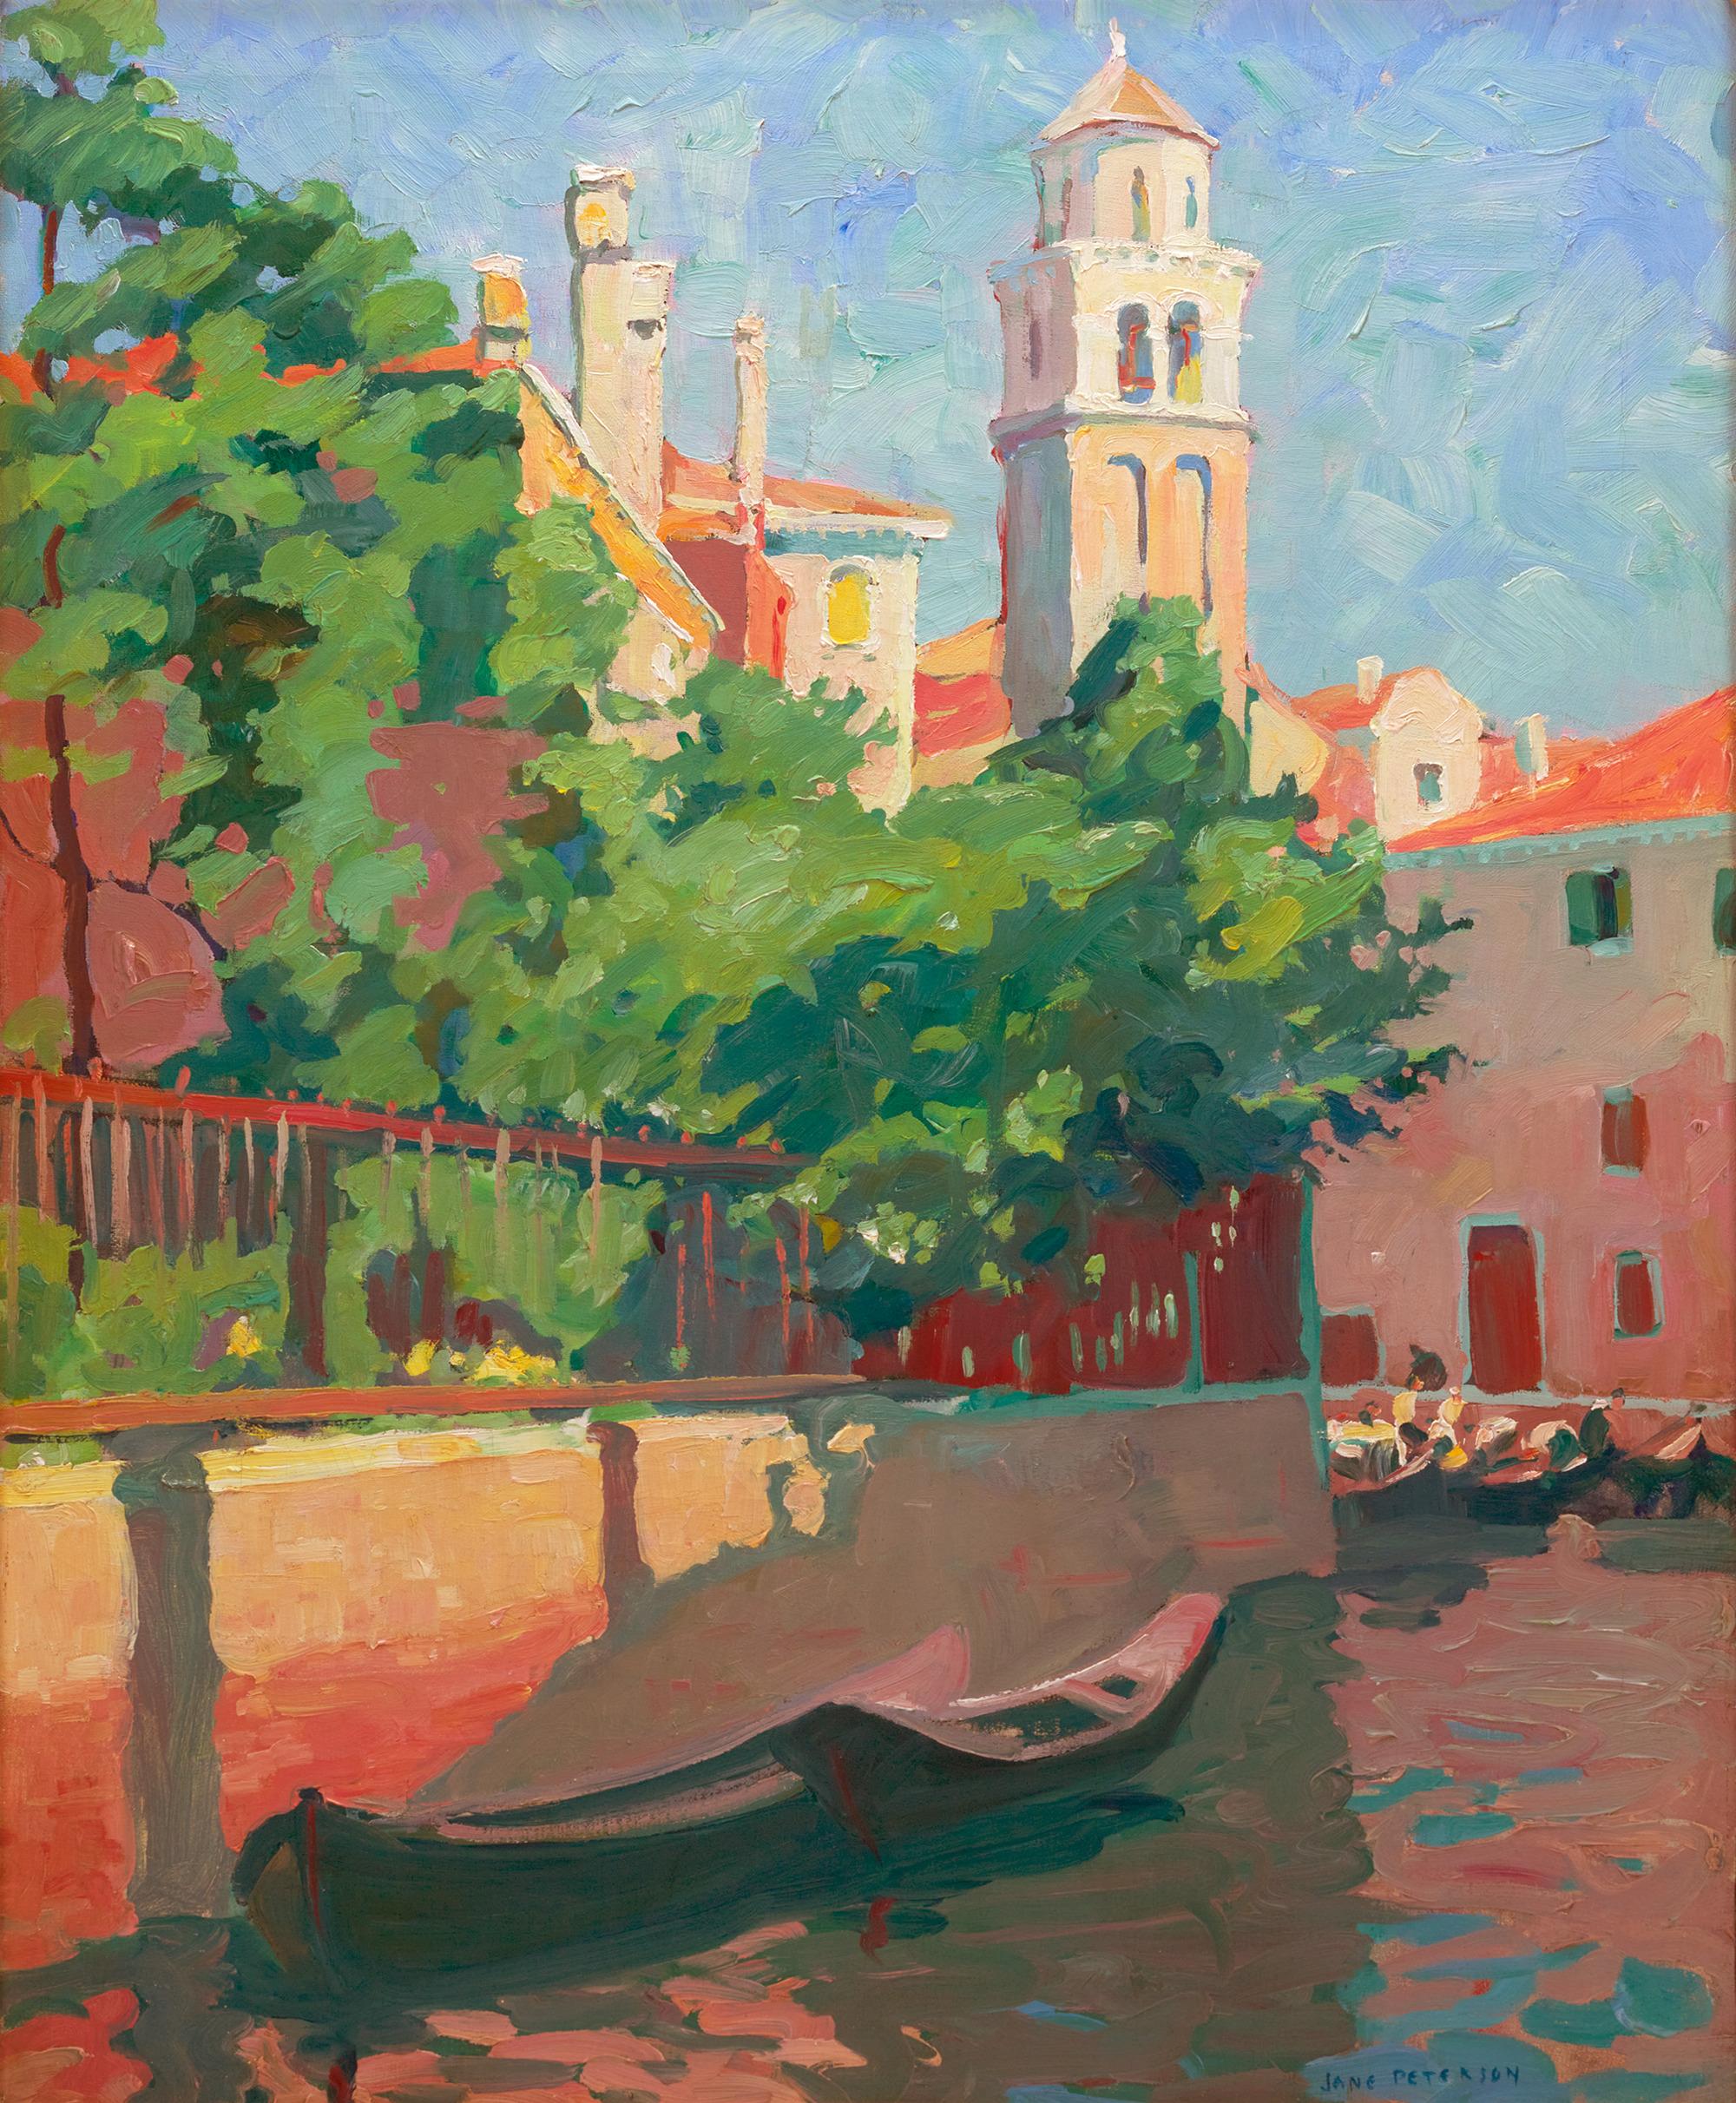 Jane Peterson
1876–1965  American

Gondolas, Venetian Canal

Signed “Jane Peterson” (lower right)
Oil on canvas

This remarkable painting, Gondolas, Venetian Canal, by the esteemed American artist Jane Peterson, stands as a testament to her